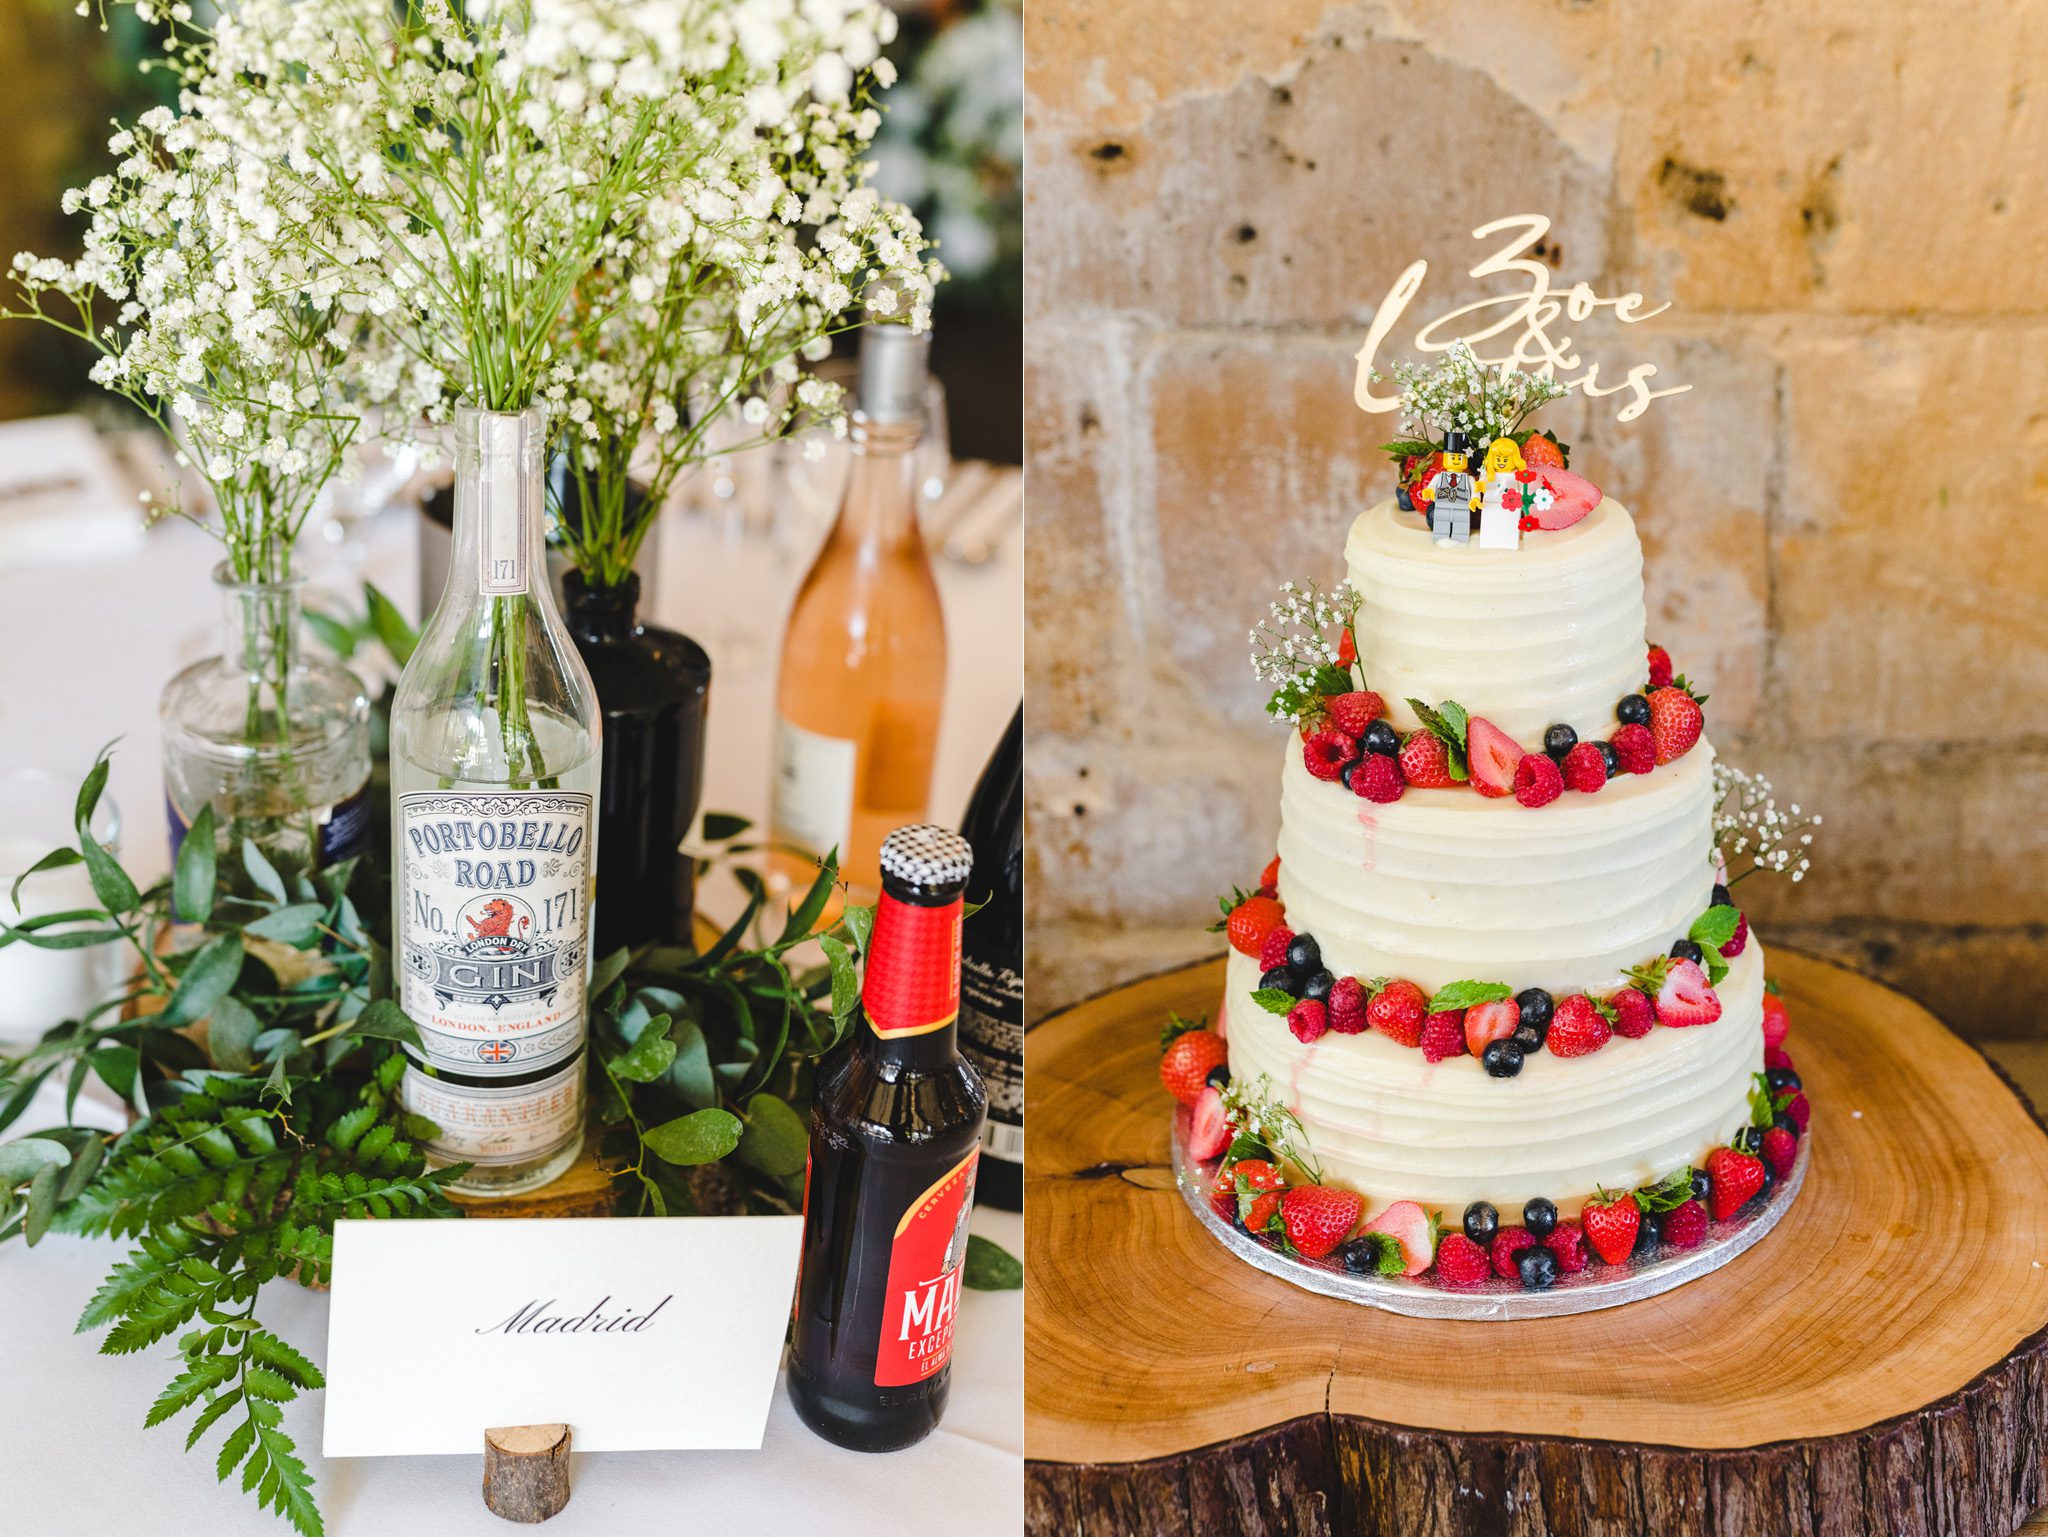 Close ups of table decor and the wedding cake